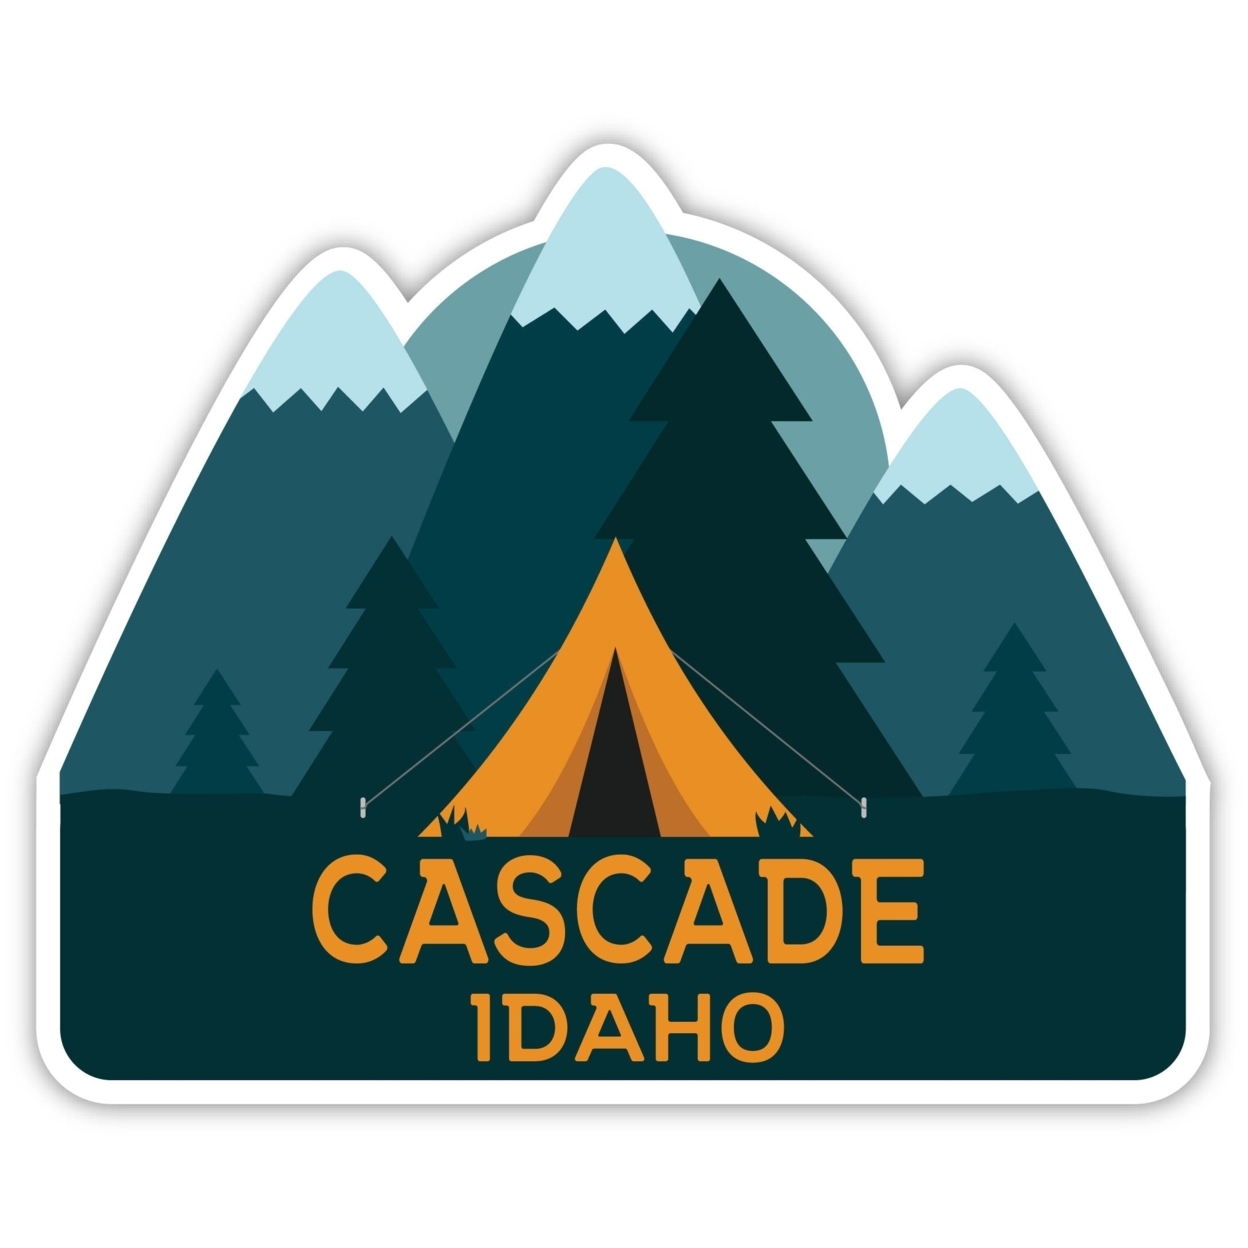 Cascade Idaho Souvenir Decorative Stickers (Choose Theme And Size) - 4-Pack, 4-Inch, Adventures Awaits